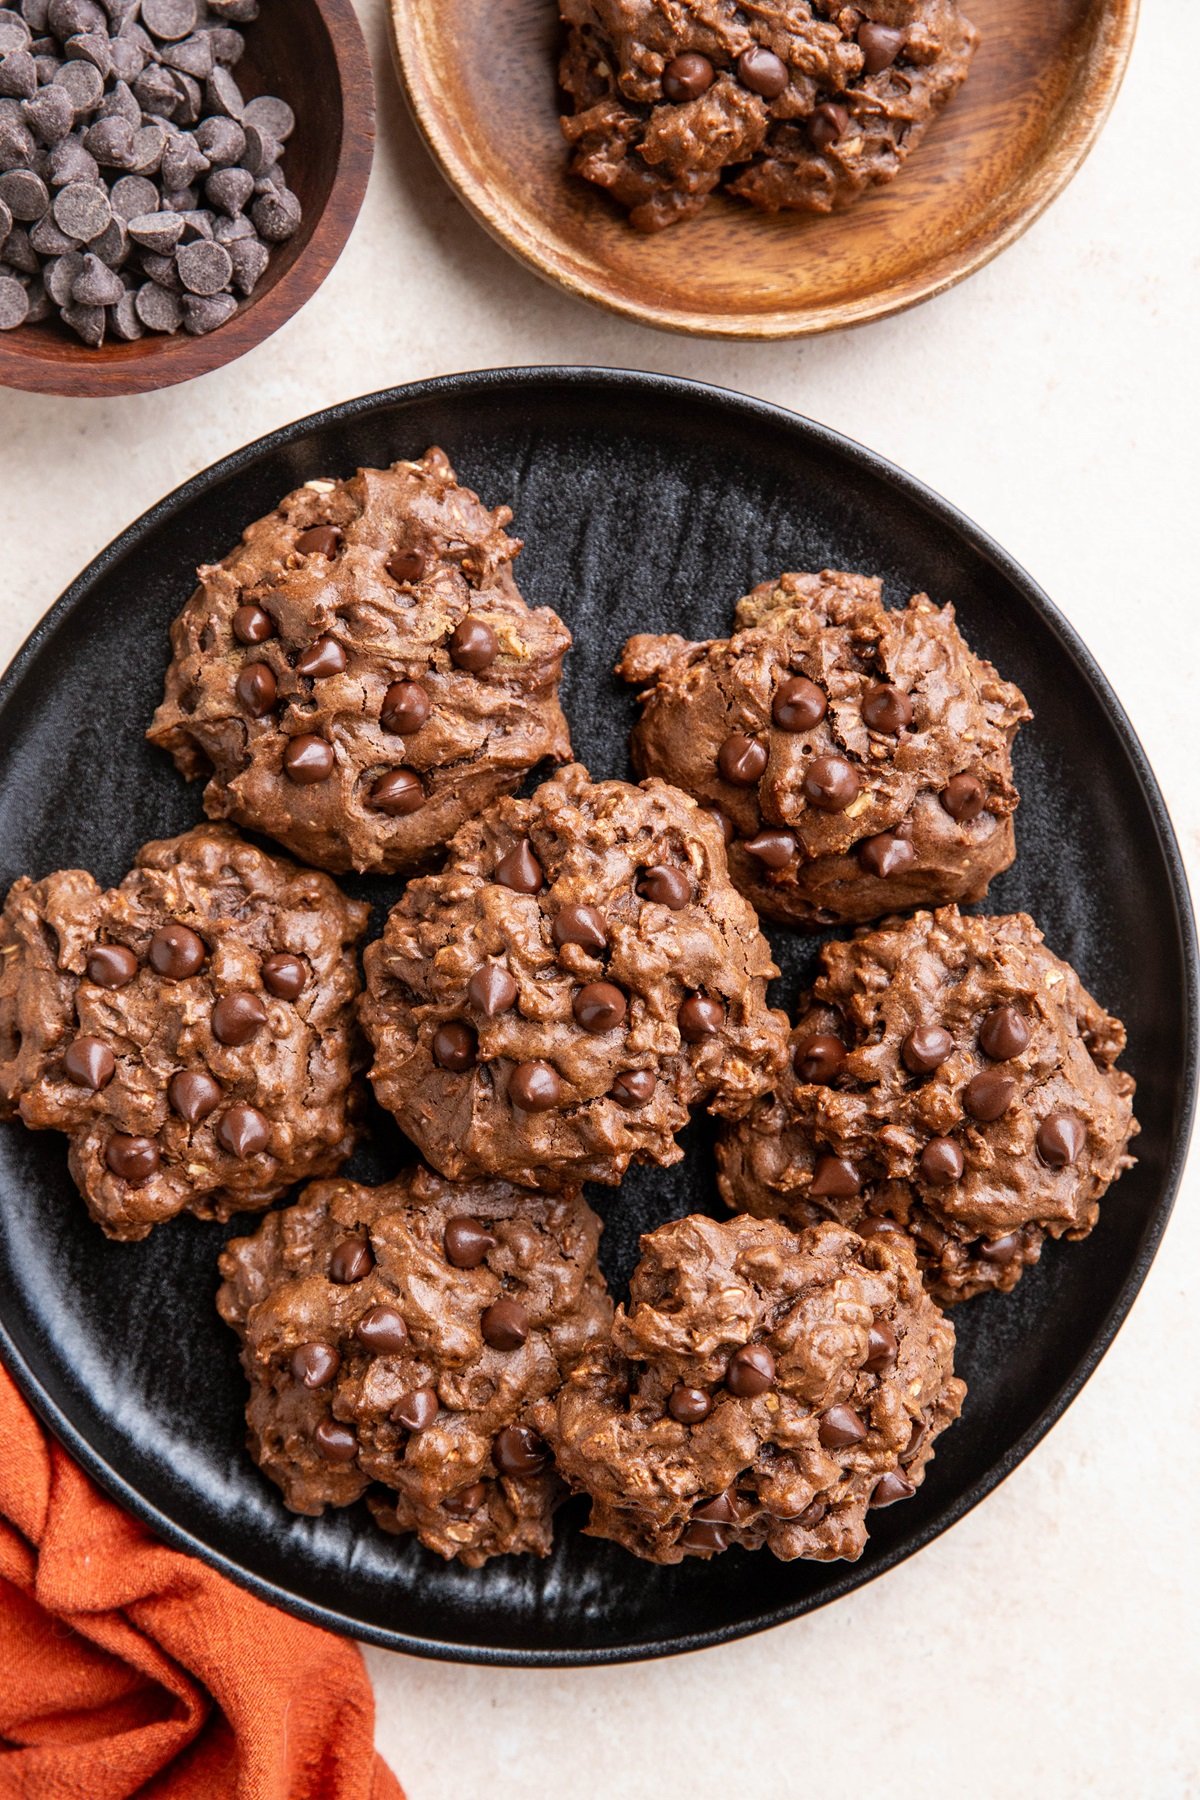 Black plate of chocolate peanut butter cookies